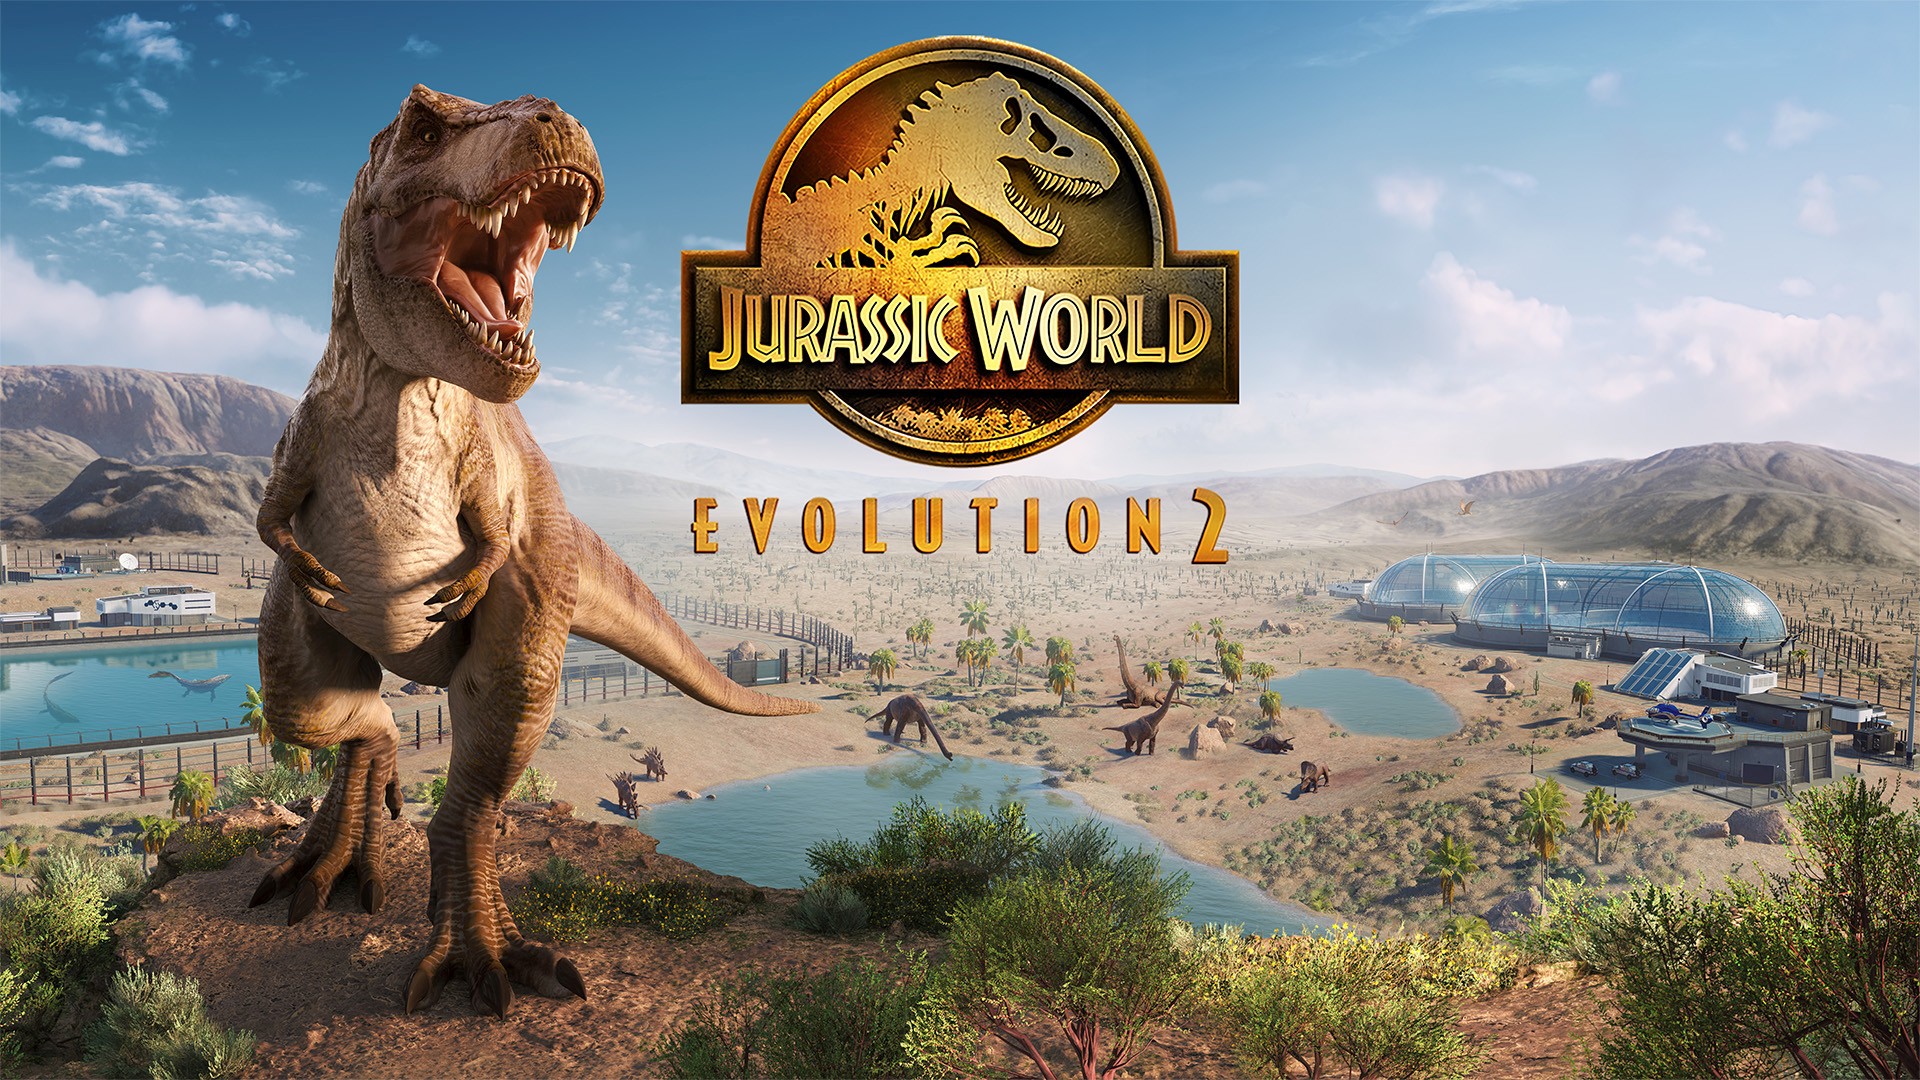 Jurassic Park Xxx Video - Bring Dinosaurs to Life in Jurassic World Evolution 2, Available Now for  Xbox One and Xbox Series X|S - Xbox Wire